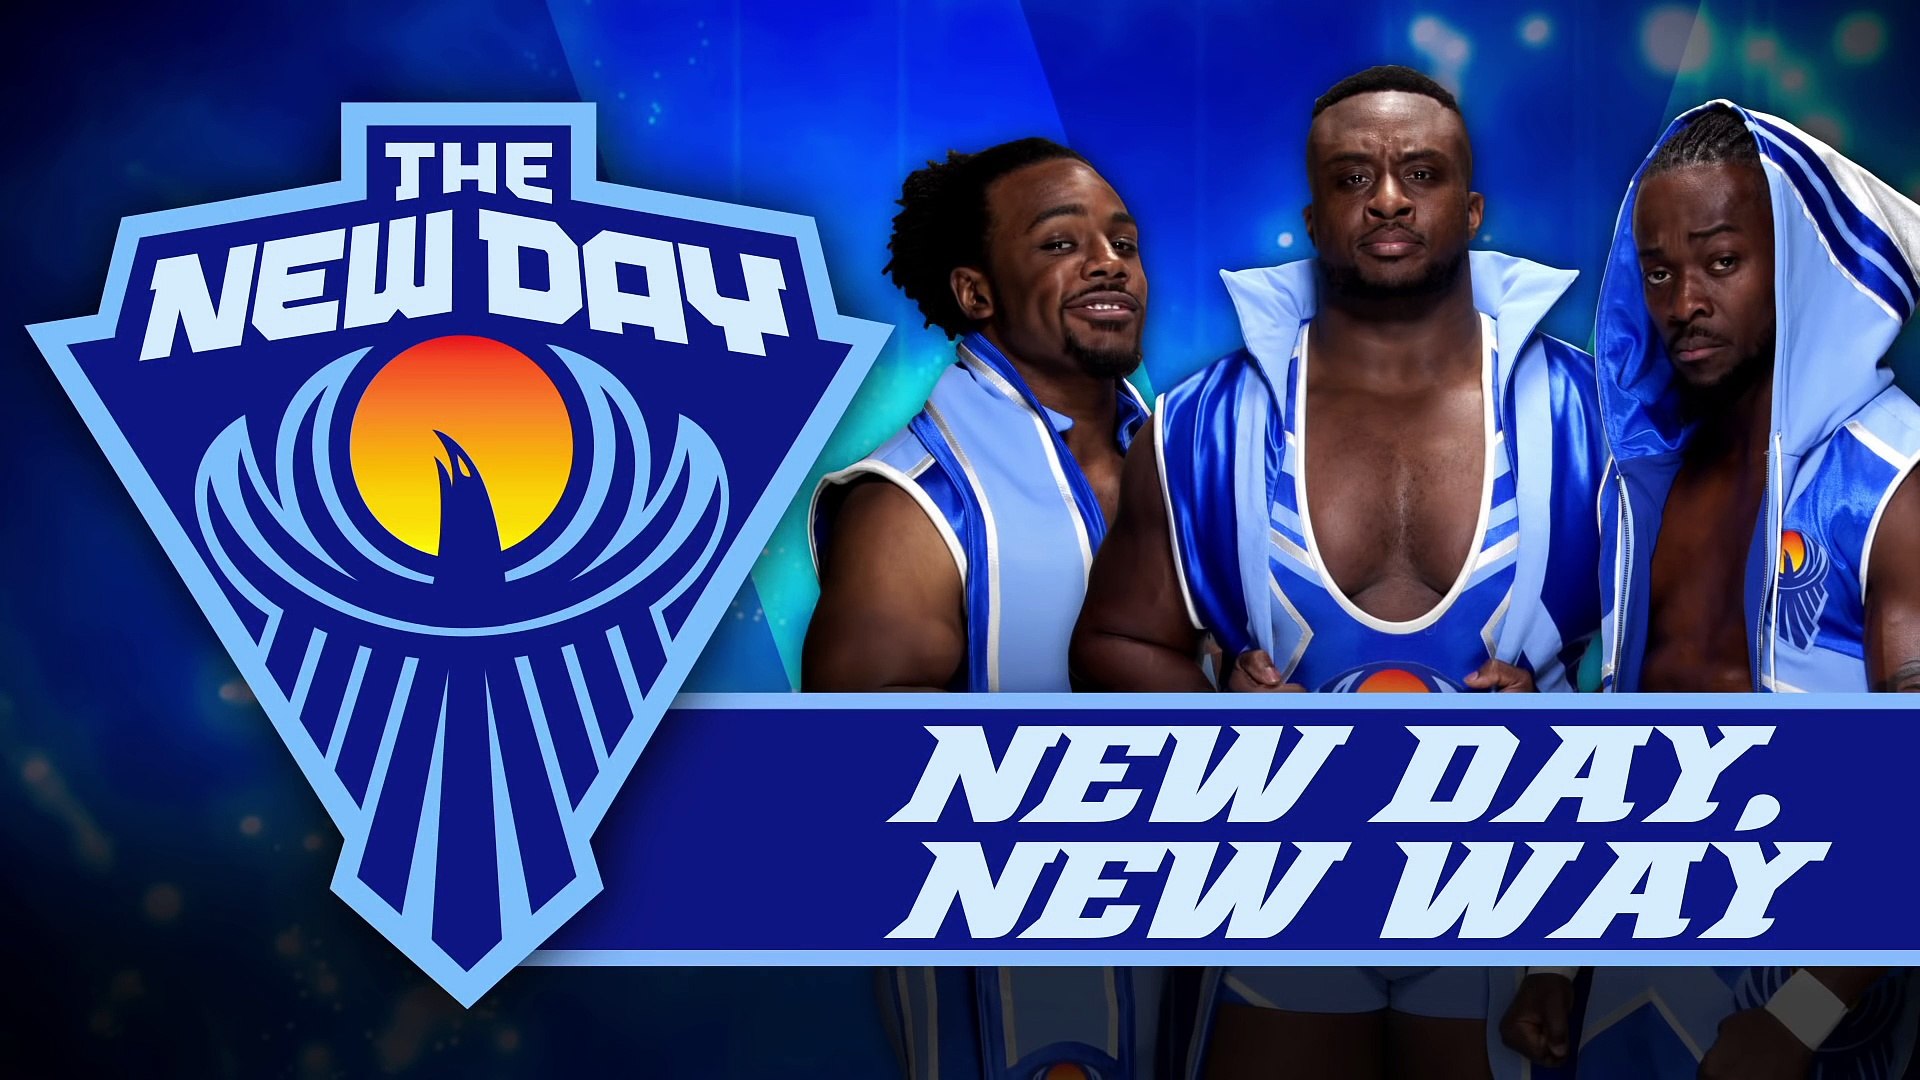 ⁣The New Day: New Day, New Way (Official Theme)